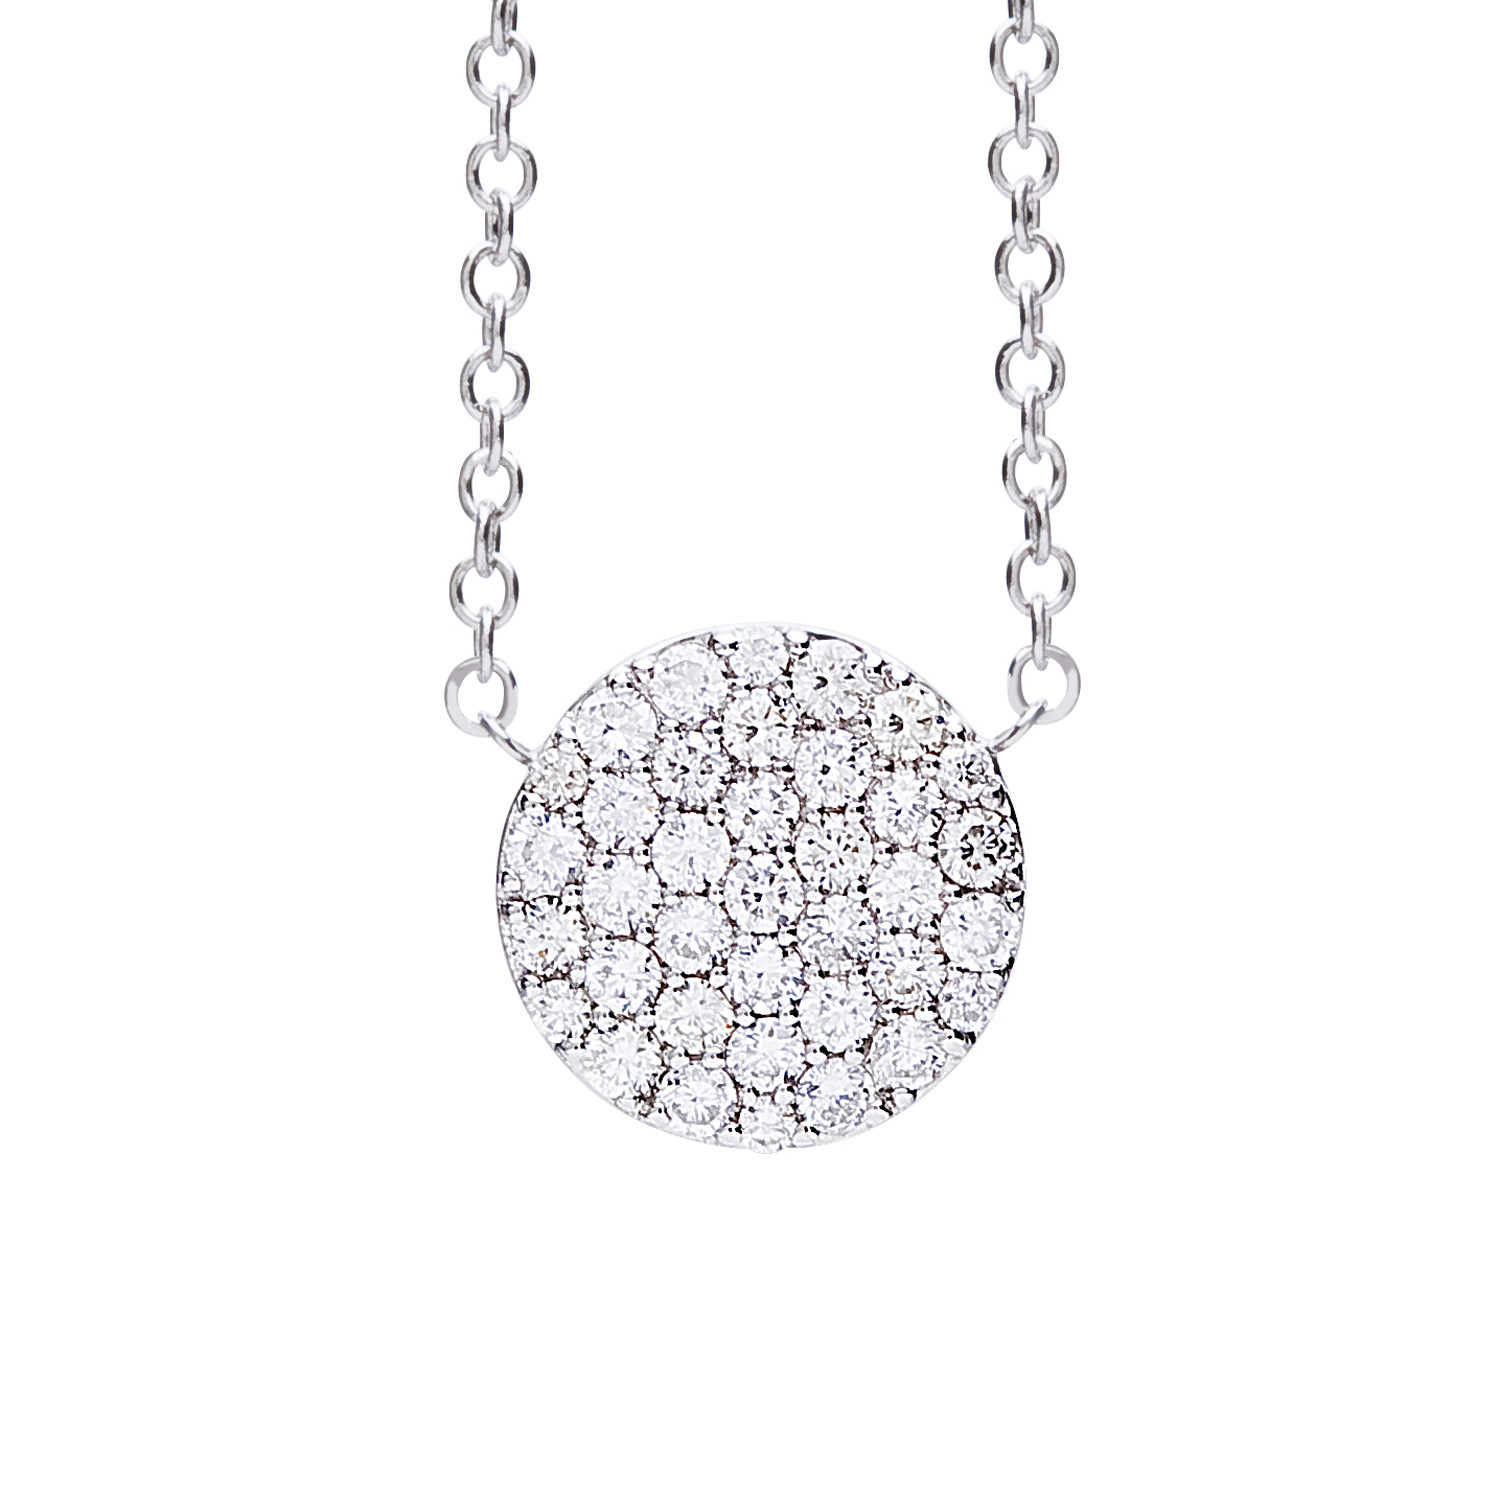 Collier One More or blanc 18 carats et diamants